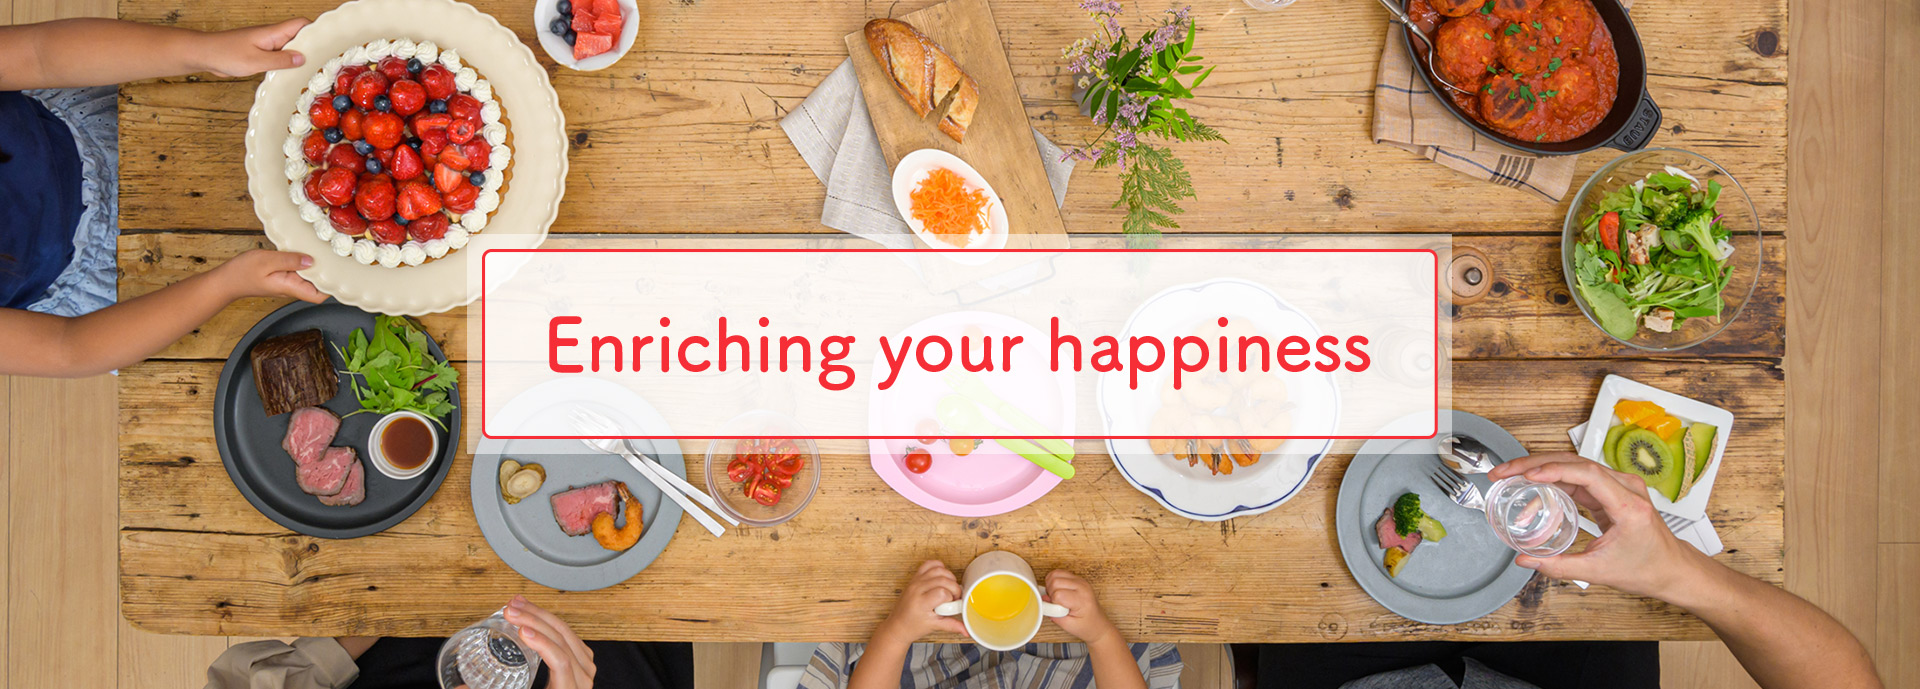 Enriching your happiness